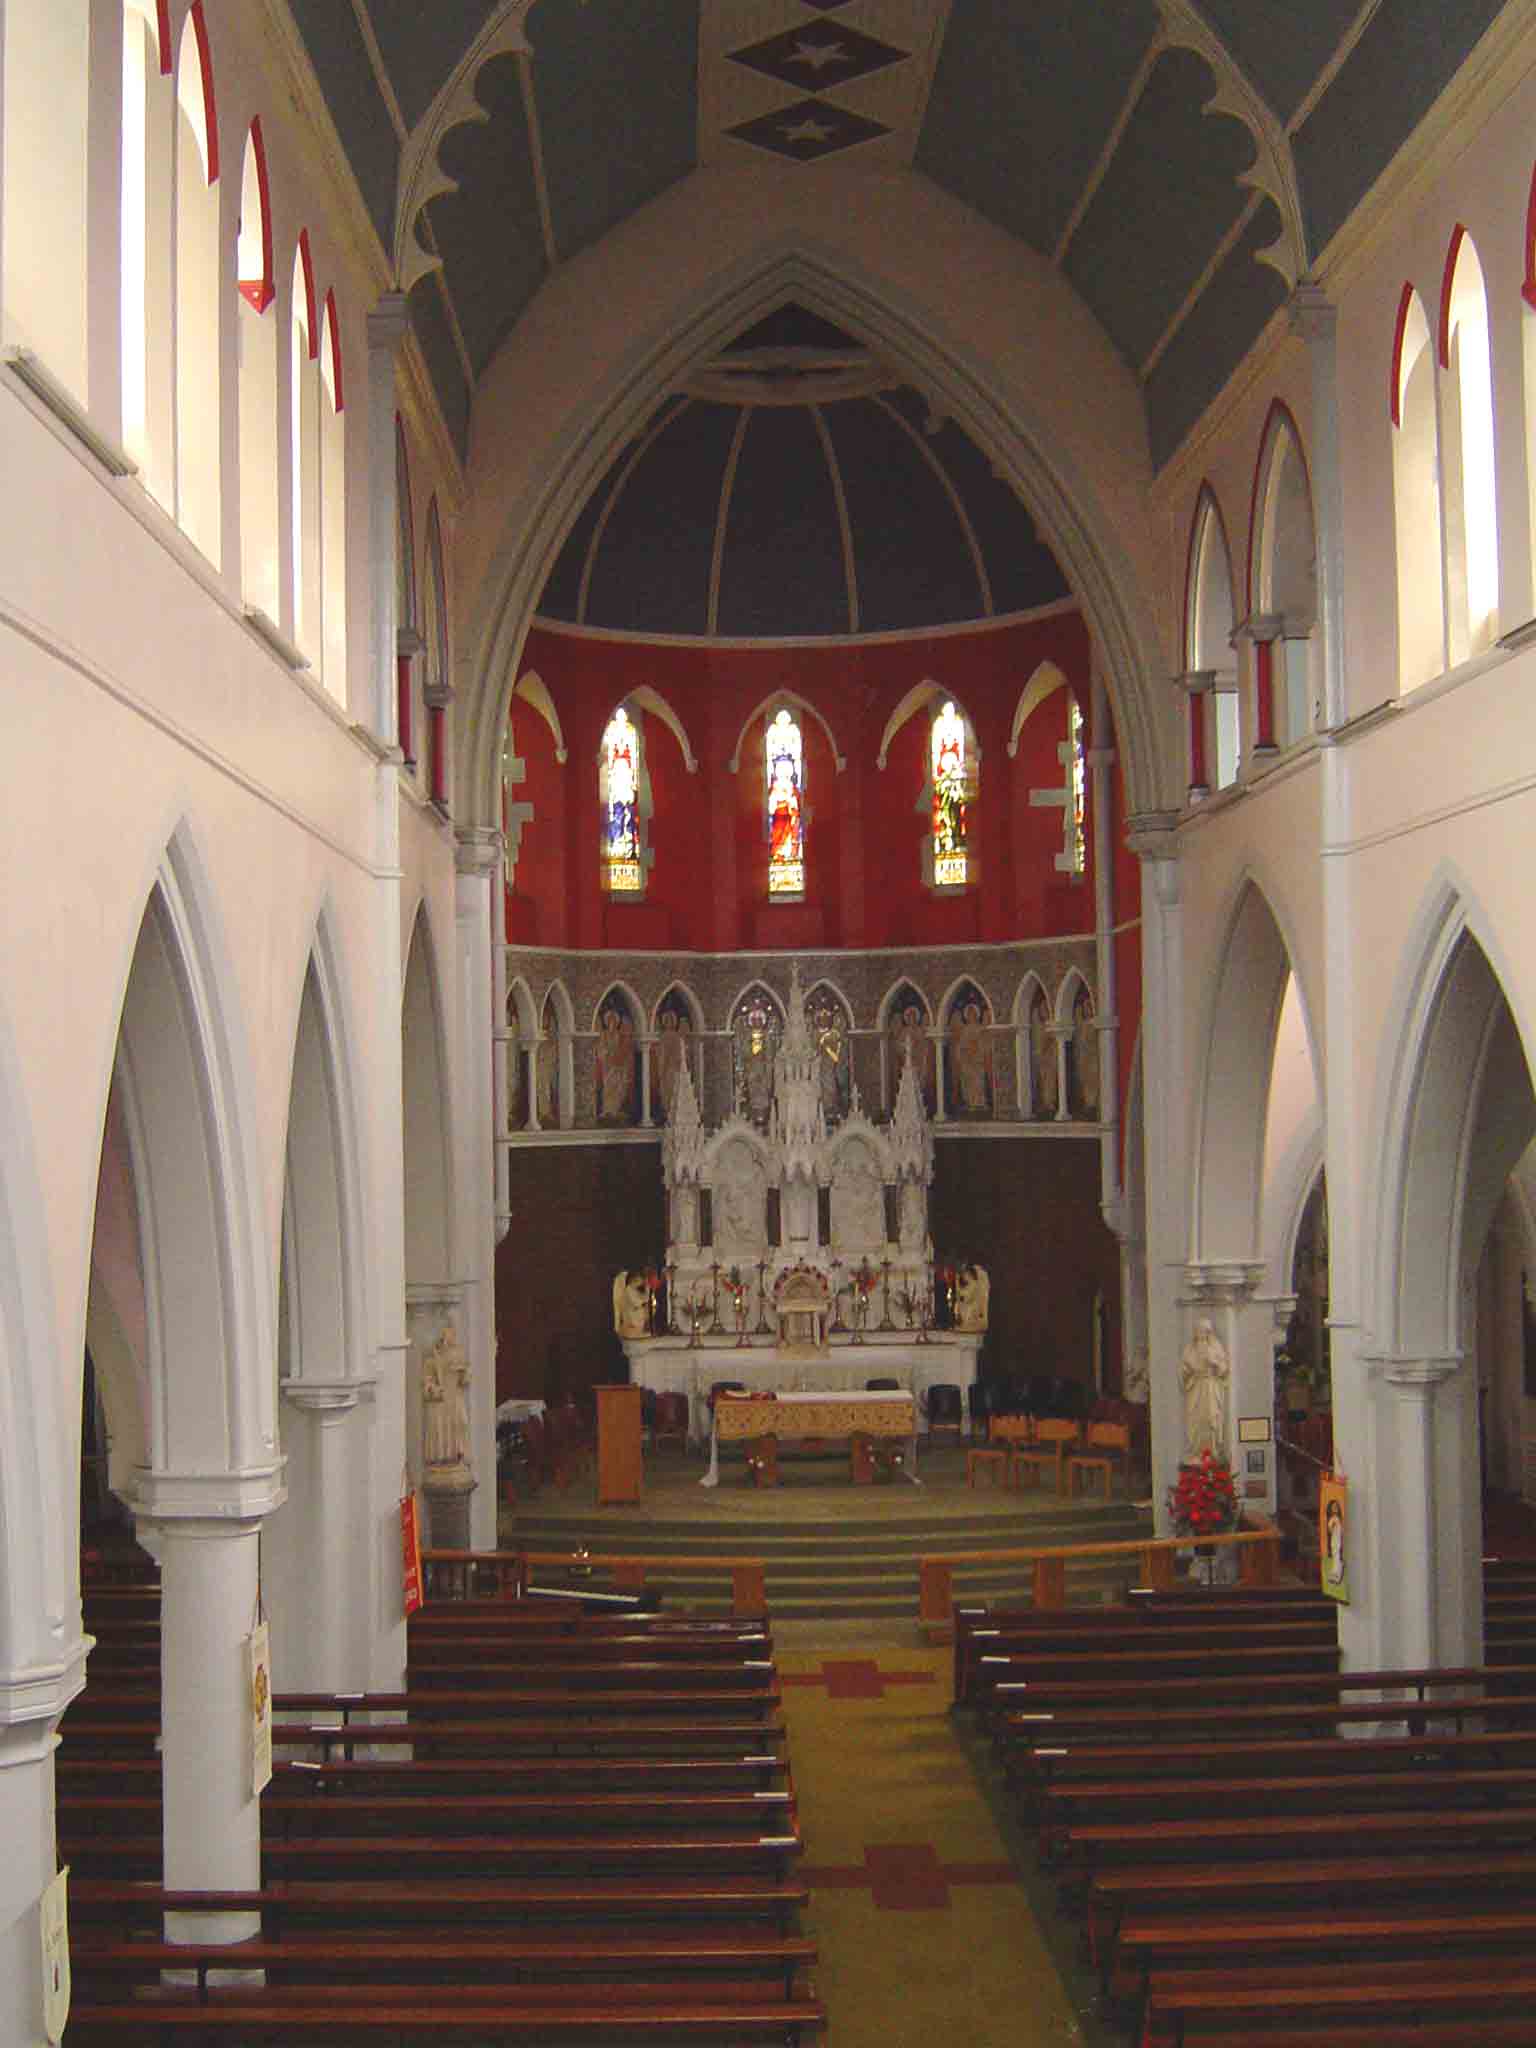 The Interior of the Sacred Heart